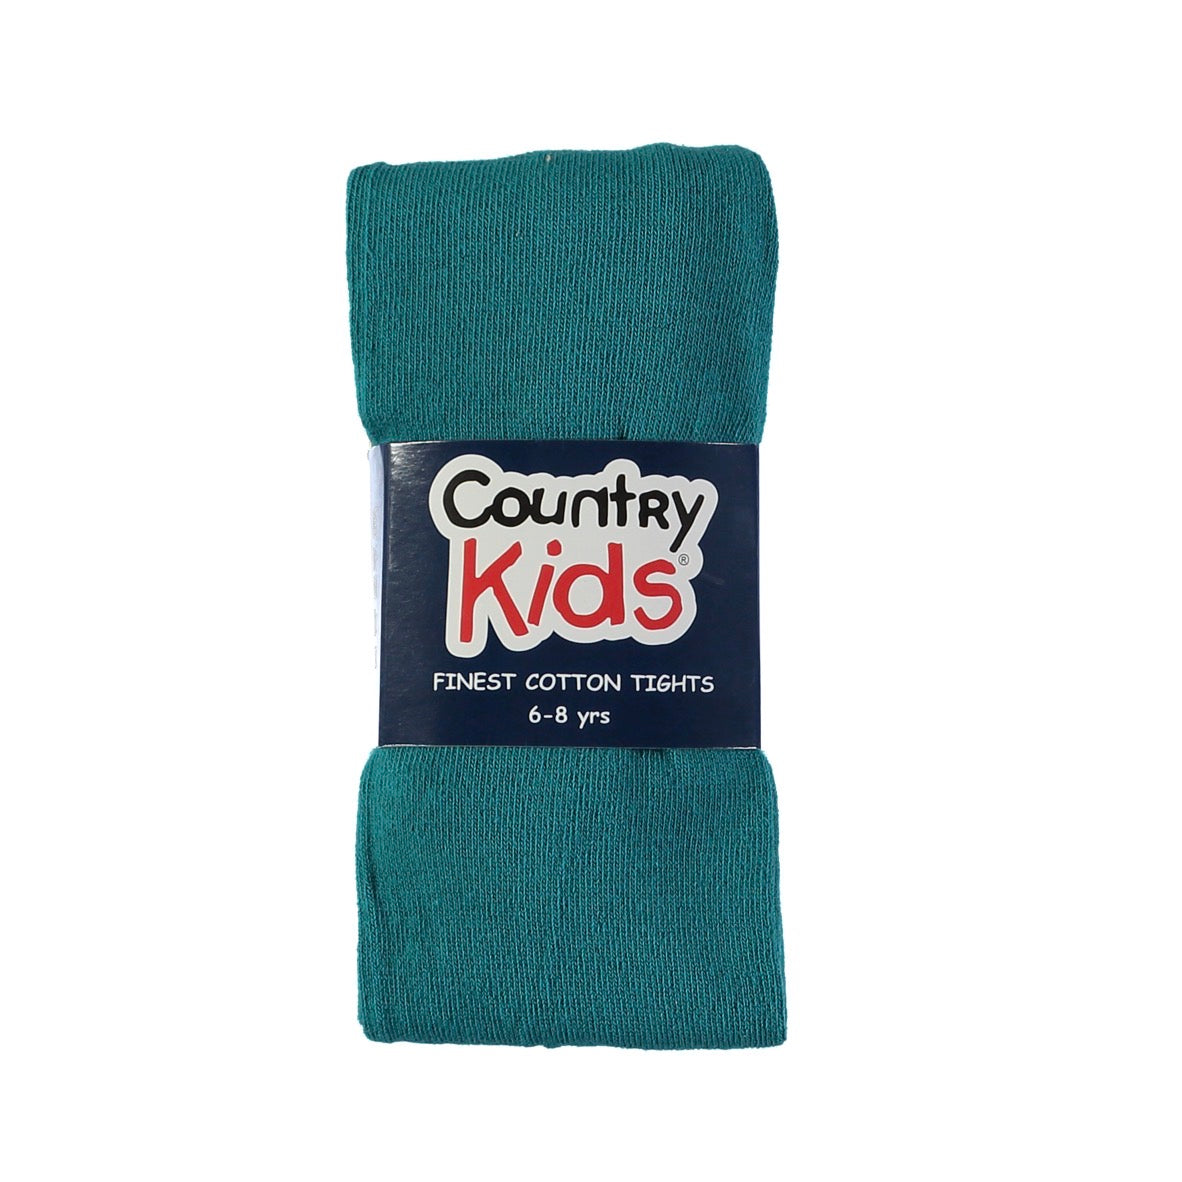 Country Kids Plain Tights Teal Clothing 1-3YRS / Teal,3-5YRS / Teal,6-8YRS / Teal,9-11YRS / Teal